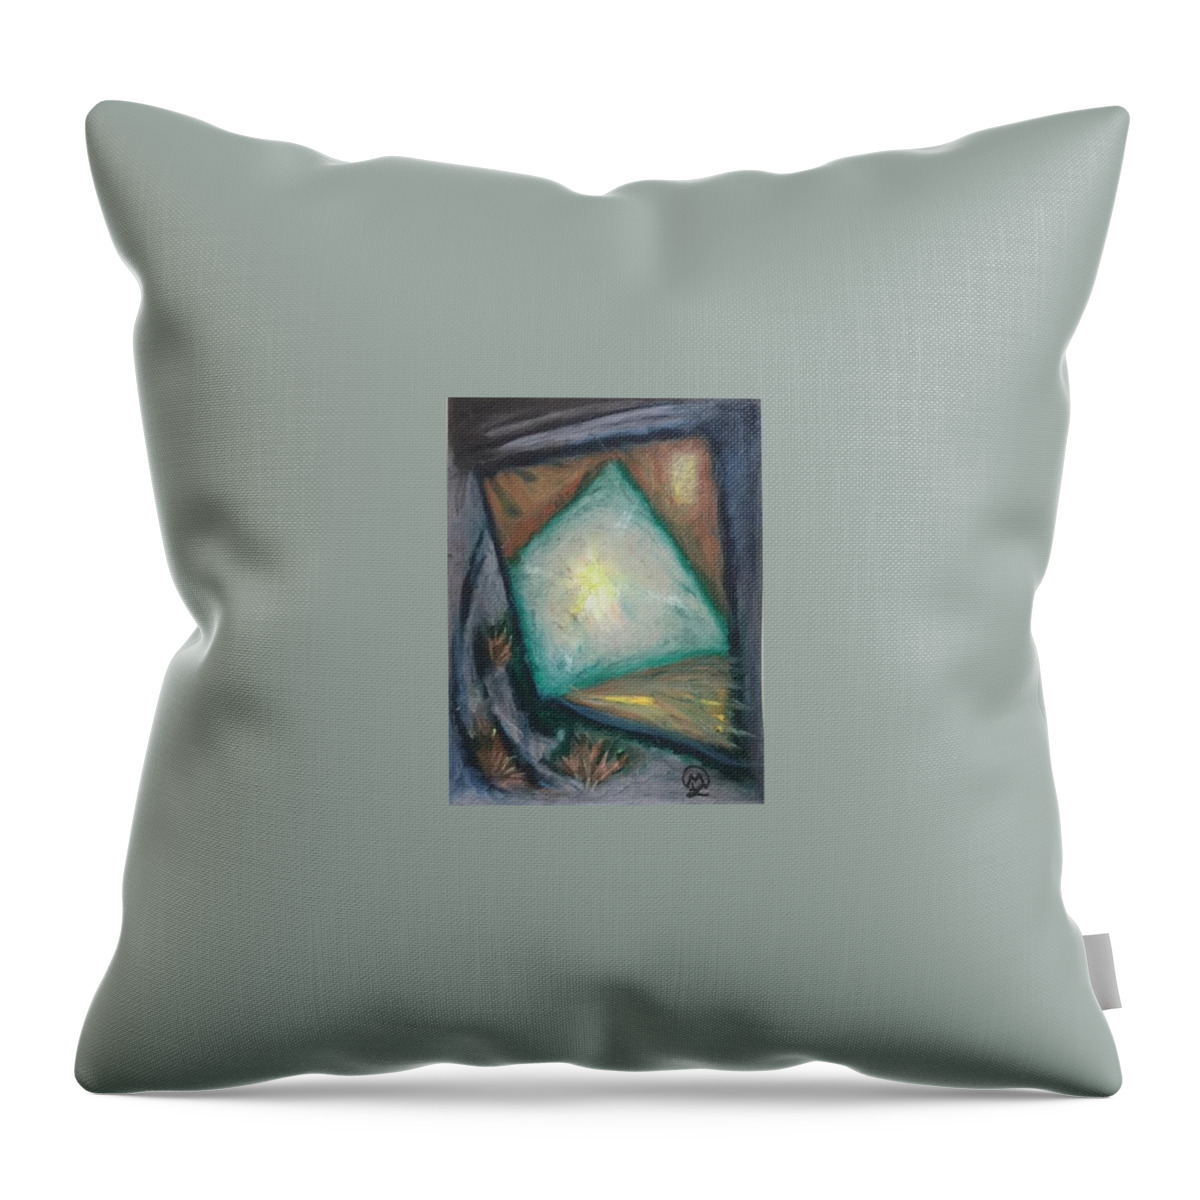  Throw Pillow featuring the pastel Abstract by Therese Legere